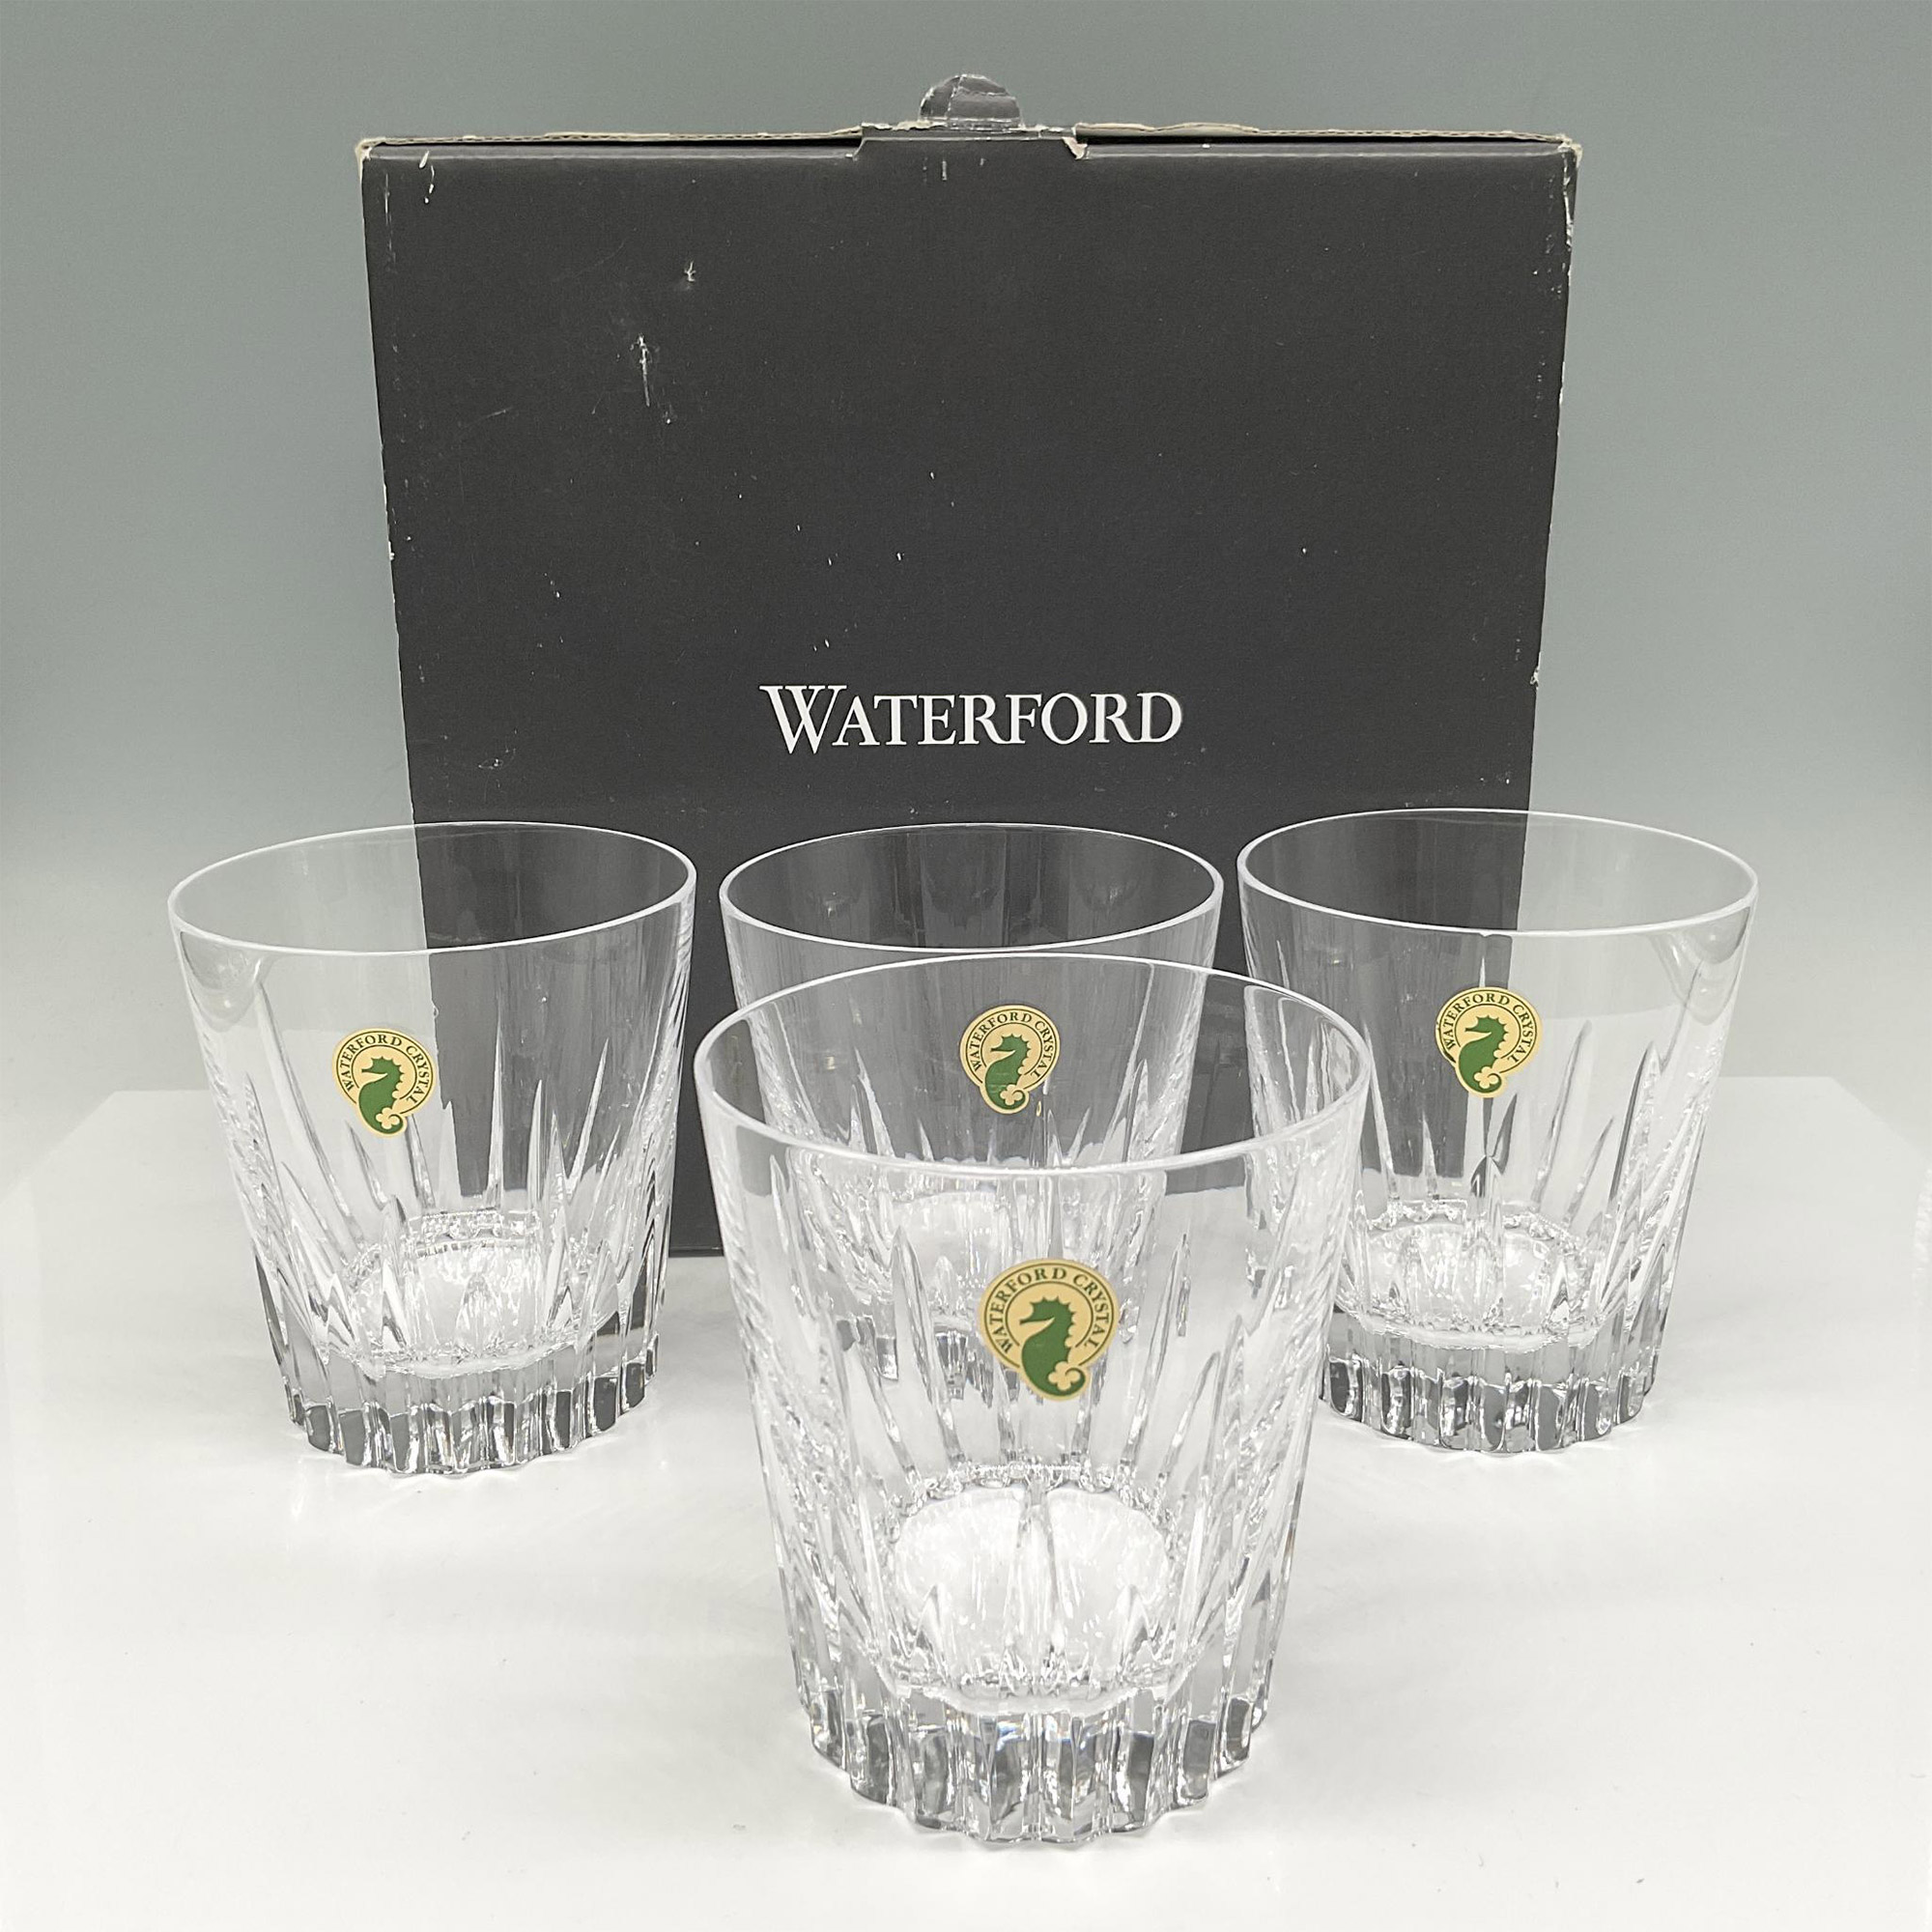 Waterford Crystal Southbridge Tumblers, Set of 4 - Image 4 of 4